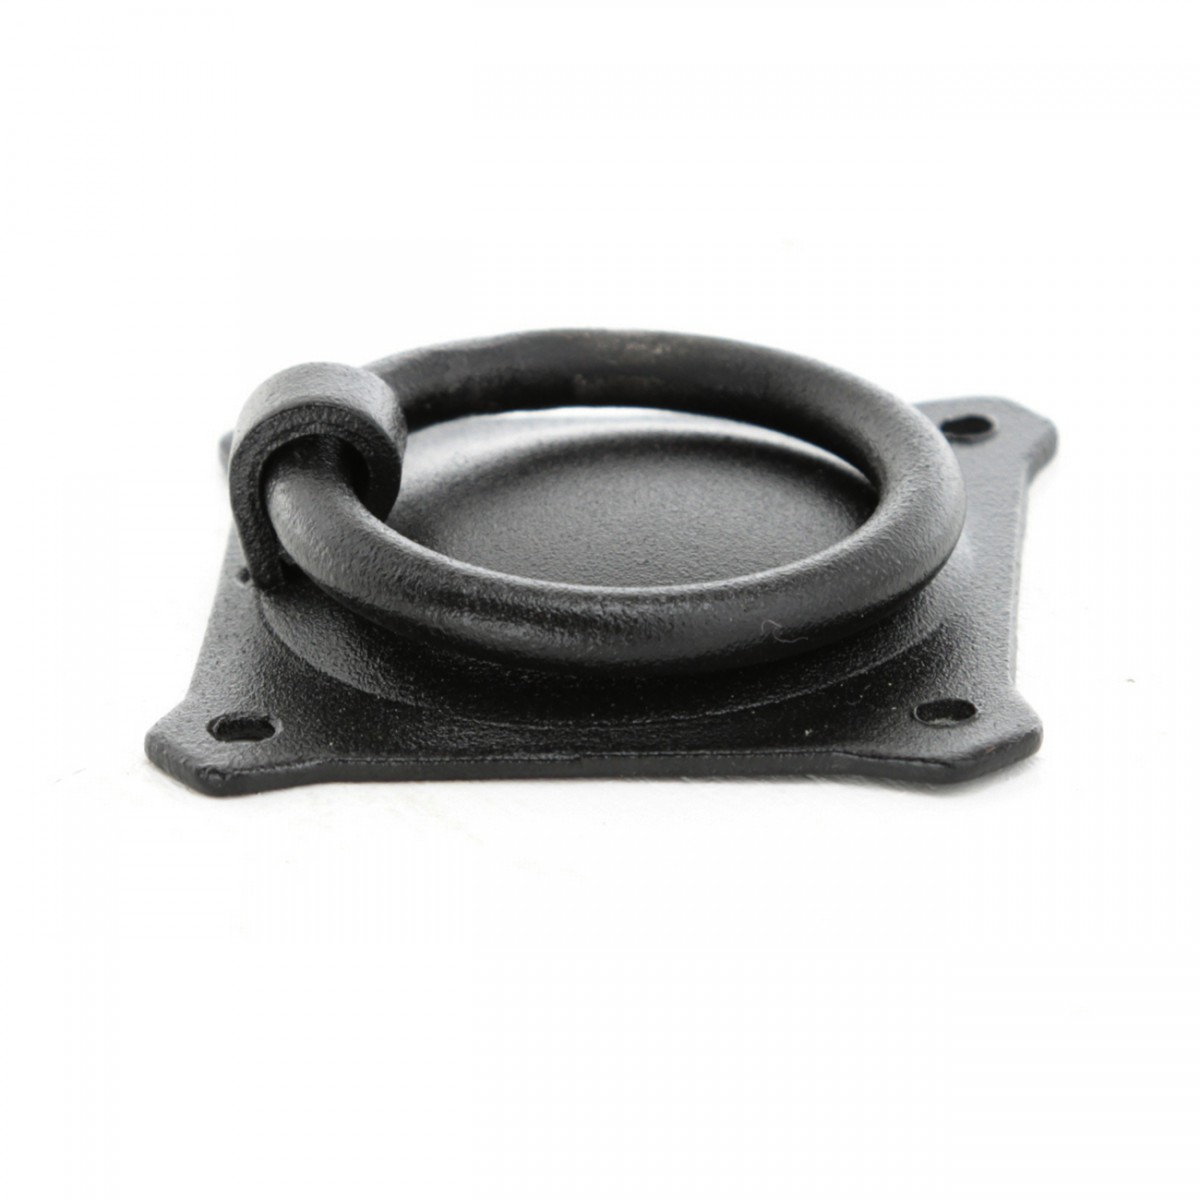 Renovators Supply Wrought Iron Mission Style Ring Pull Black Cabinet 2in Set of 4 - image 4 of 6